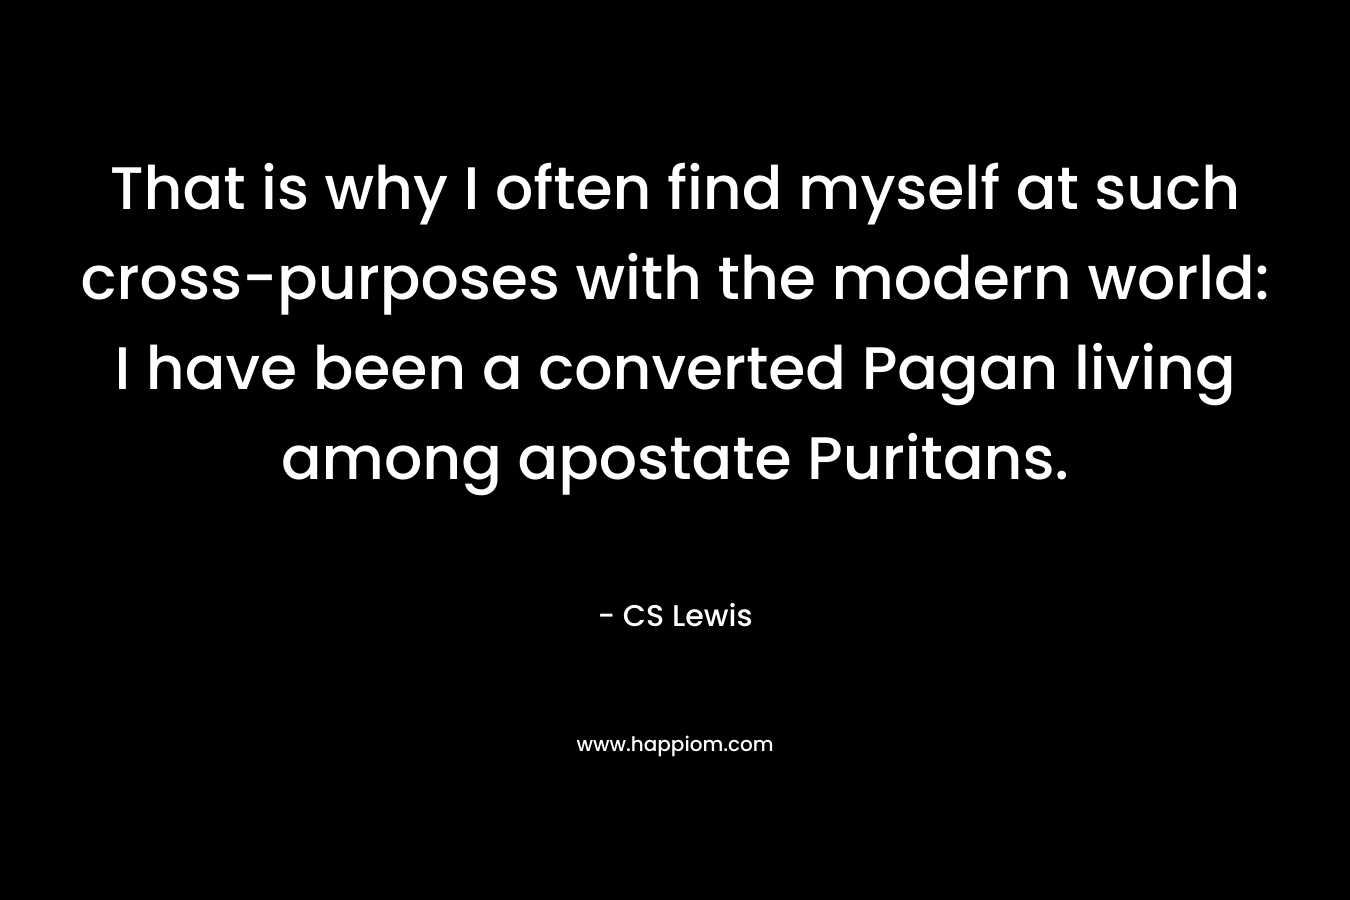 That is why I often find myself at such cross-purposes with the modern world: I have been a converted Pagan living among apostate Puritans. – CS Lewis